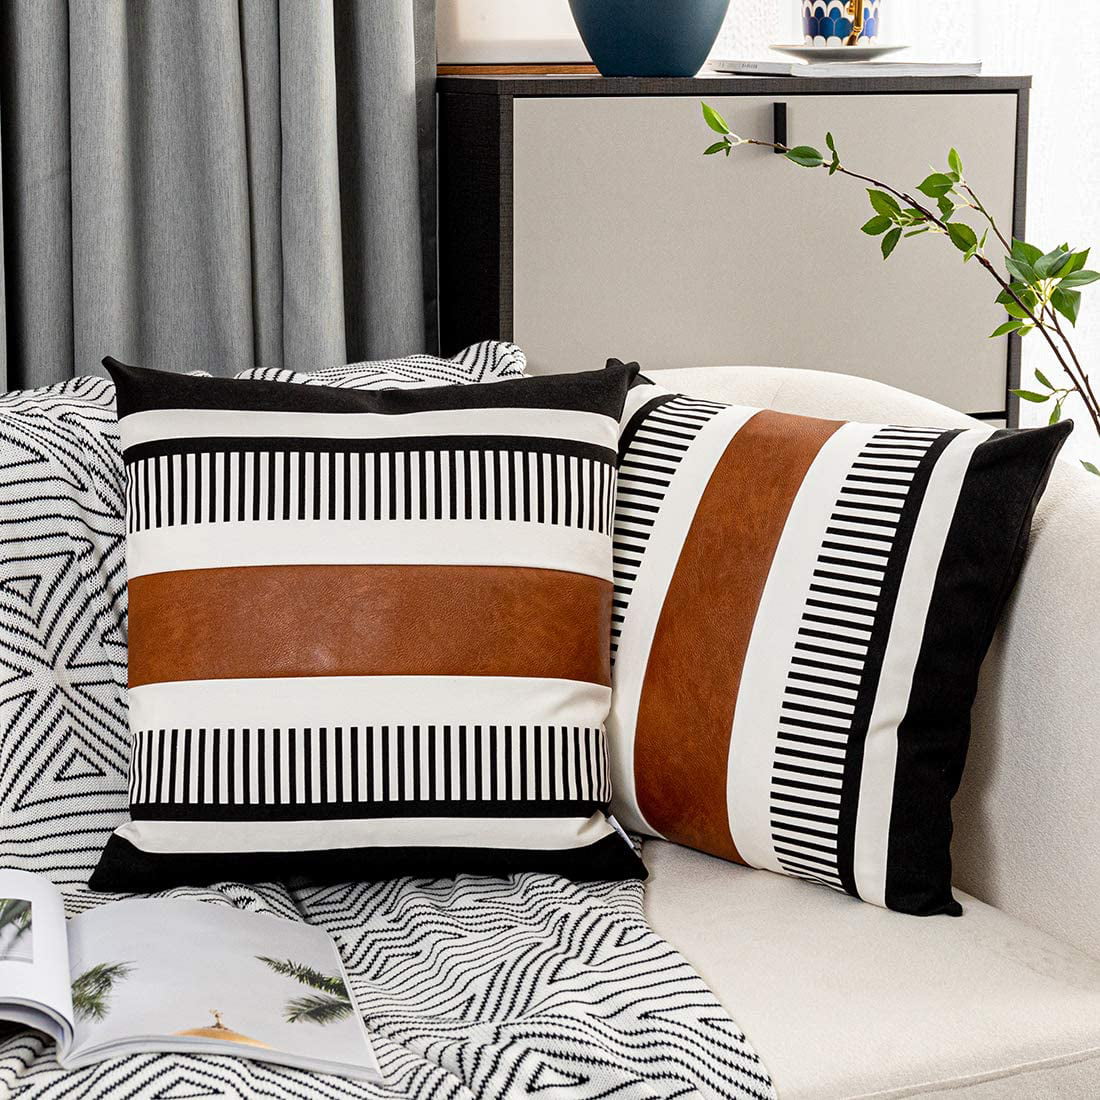 2 Black & Cream Stripe Faux Leather Cushions 16" 18" 20" & Inner Filler Pads